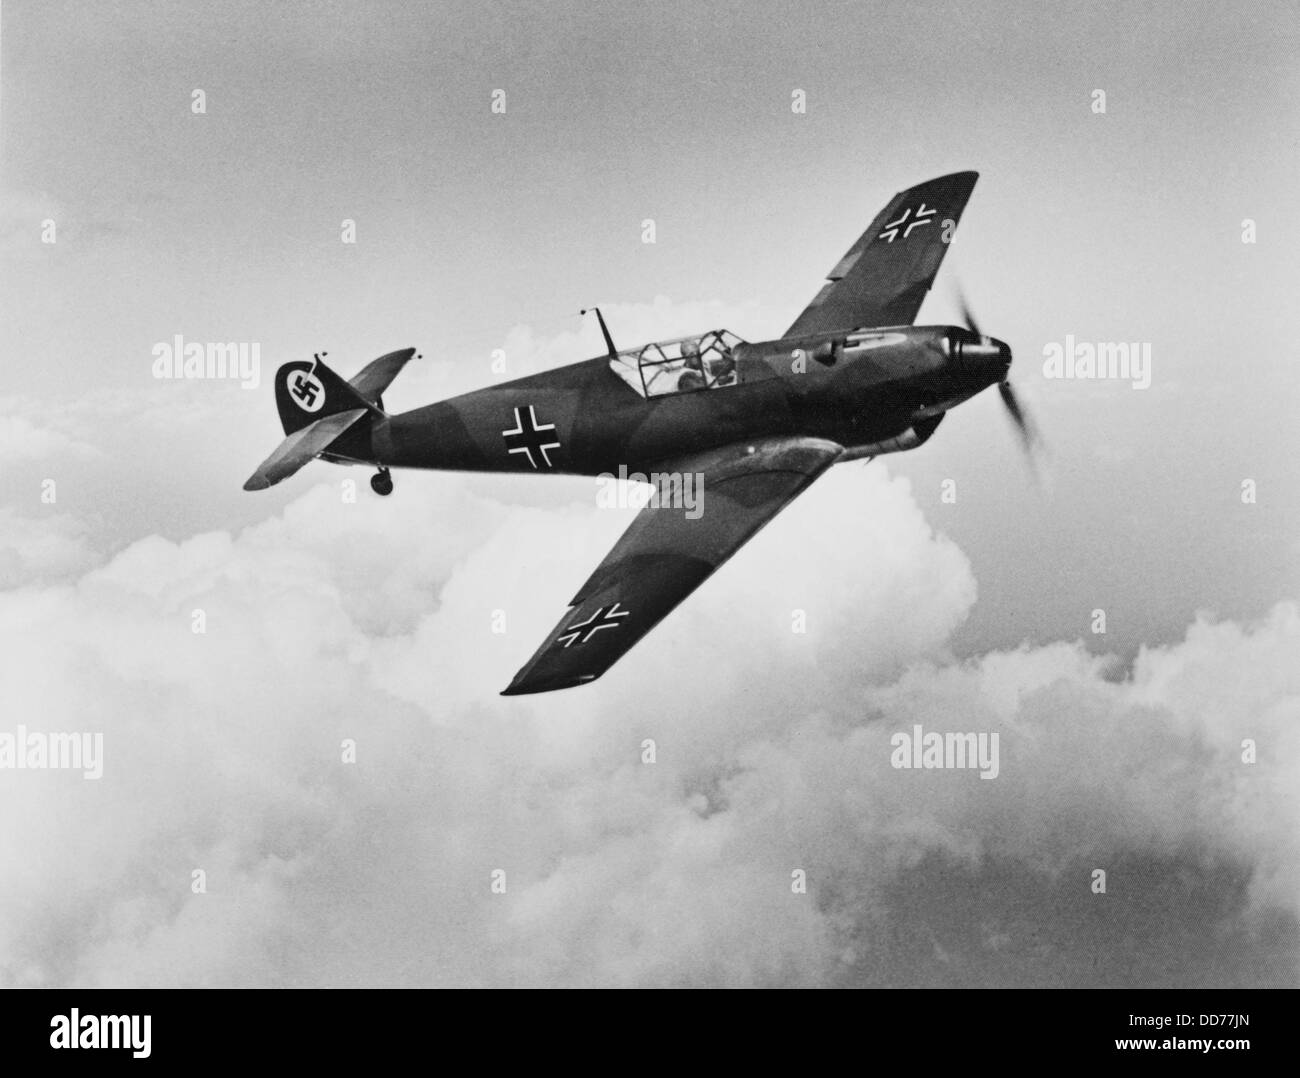 Advanced BFW German fighter aircraft in flight, 1937. Manufactured by the Bayerische Flugzeugwerke AG. It had all metal frame Stock Photo